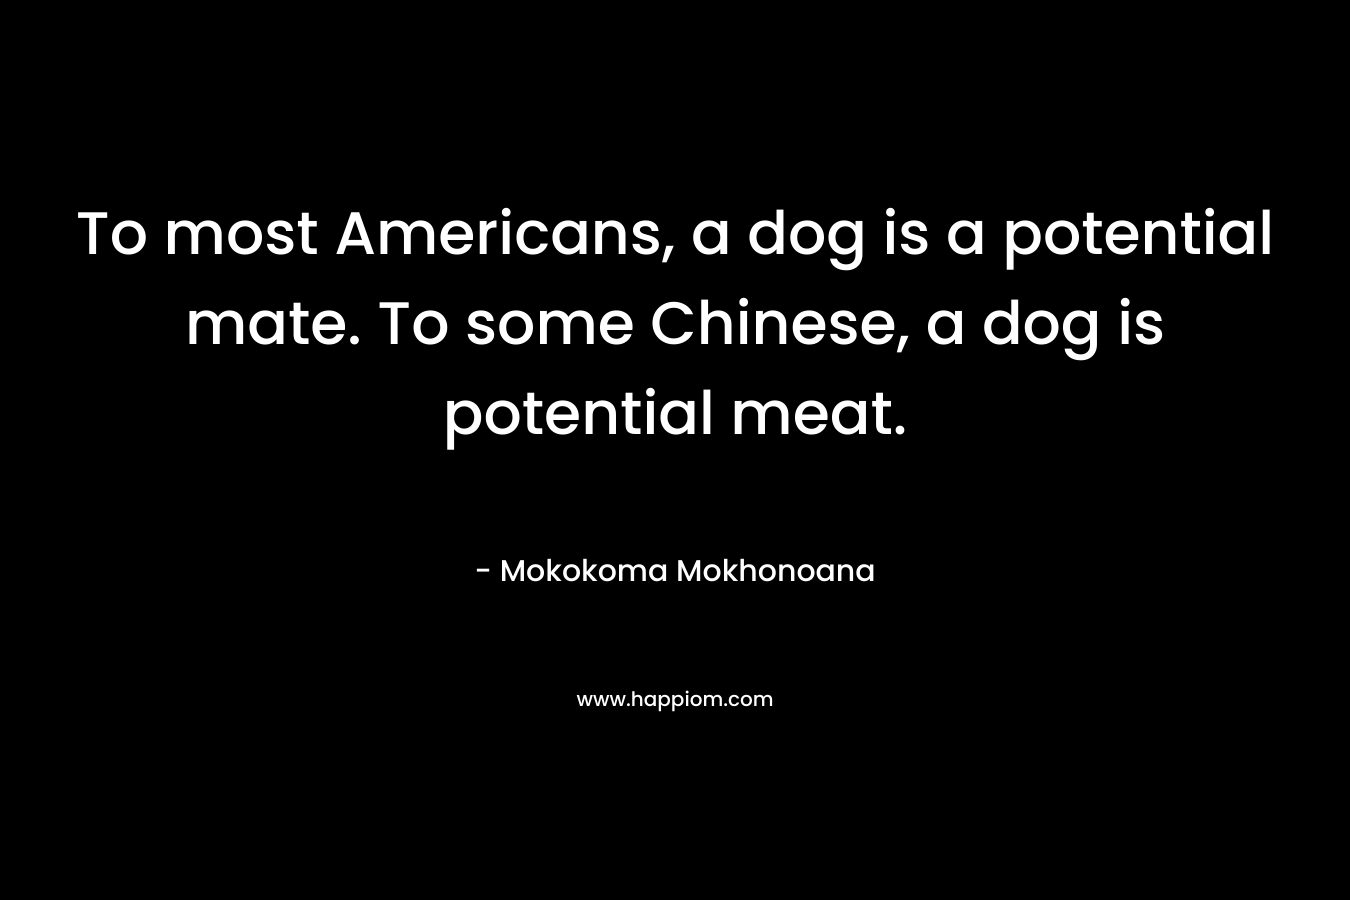 To most Americans, a dog is a potential mate. To some Chinese, a dog is potential meat.